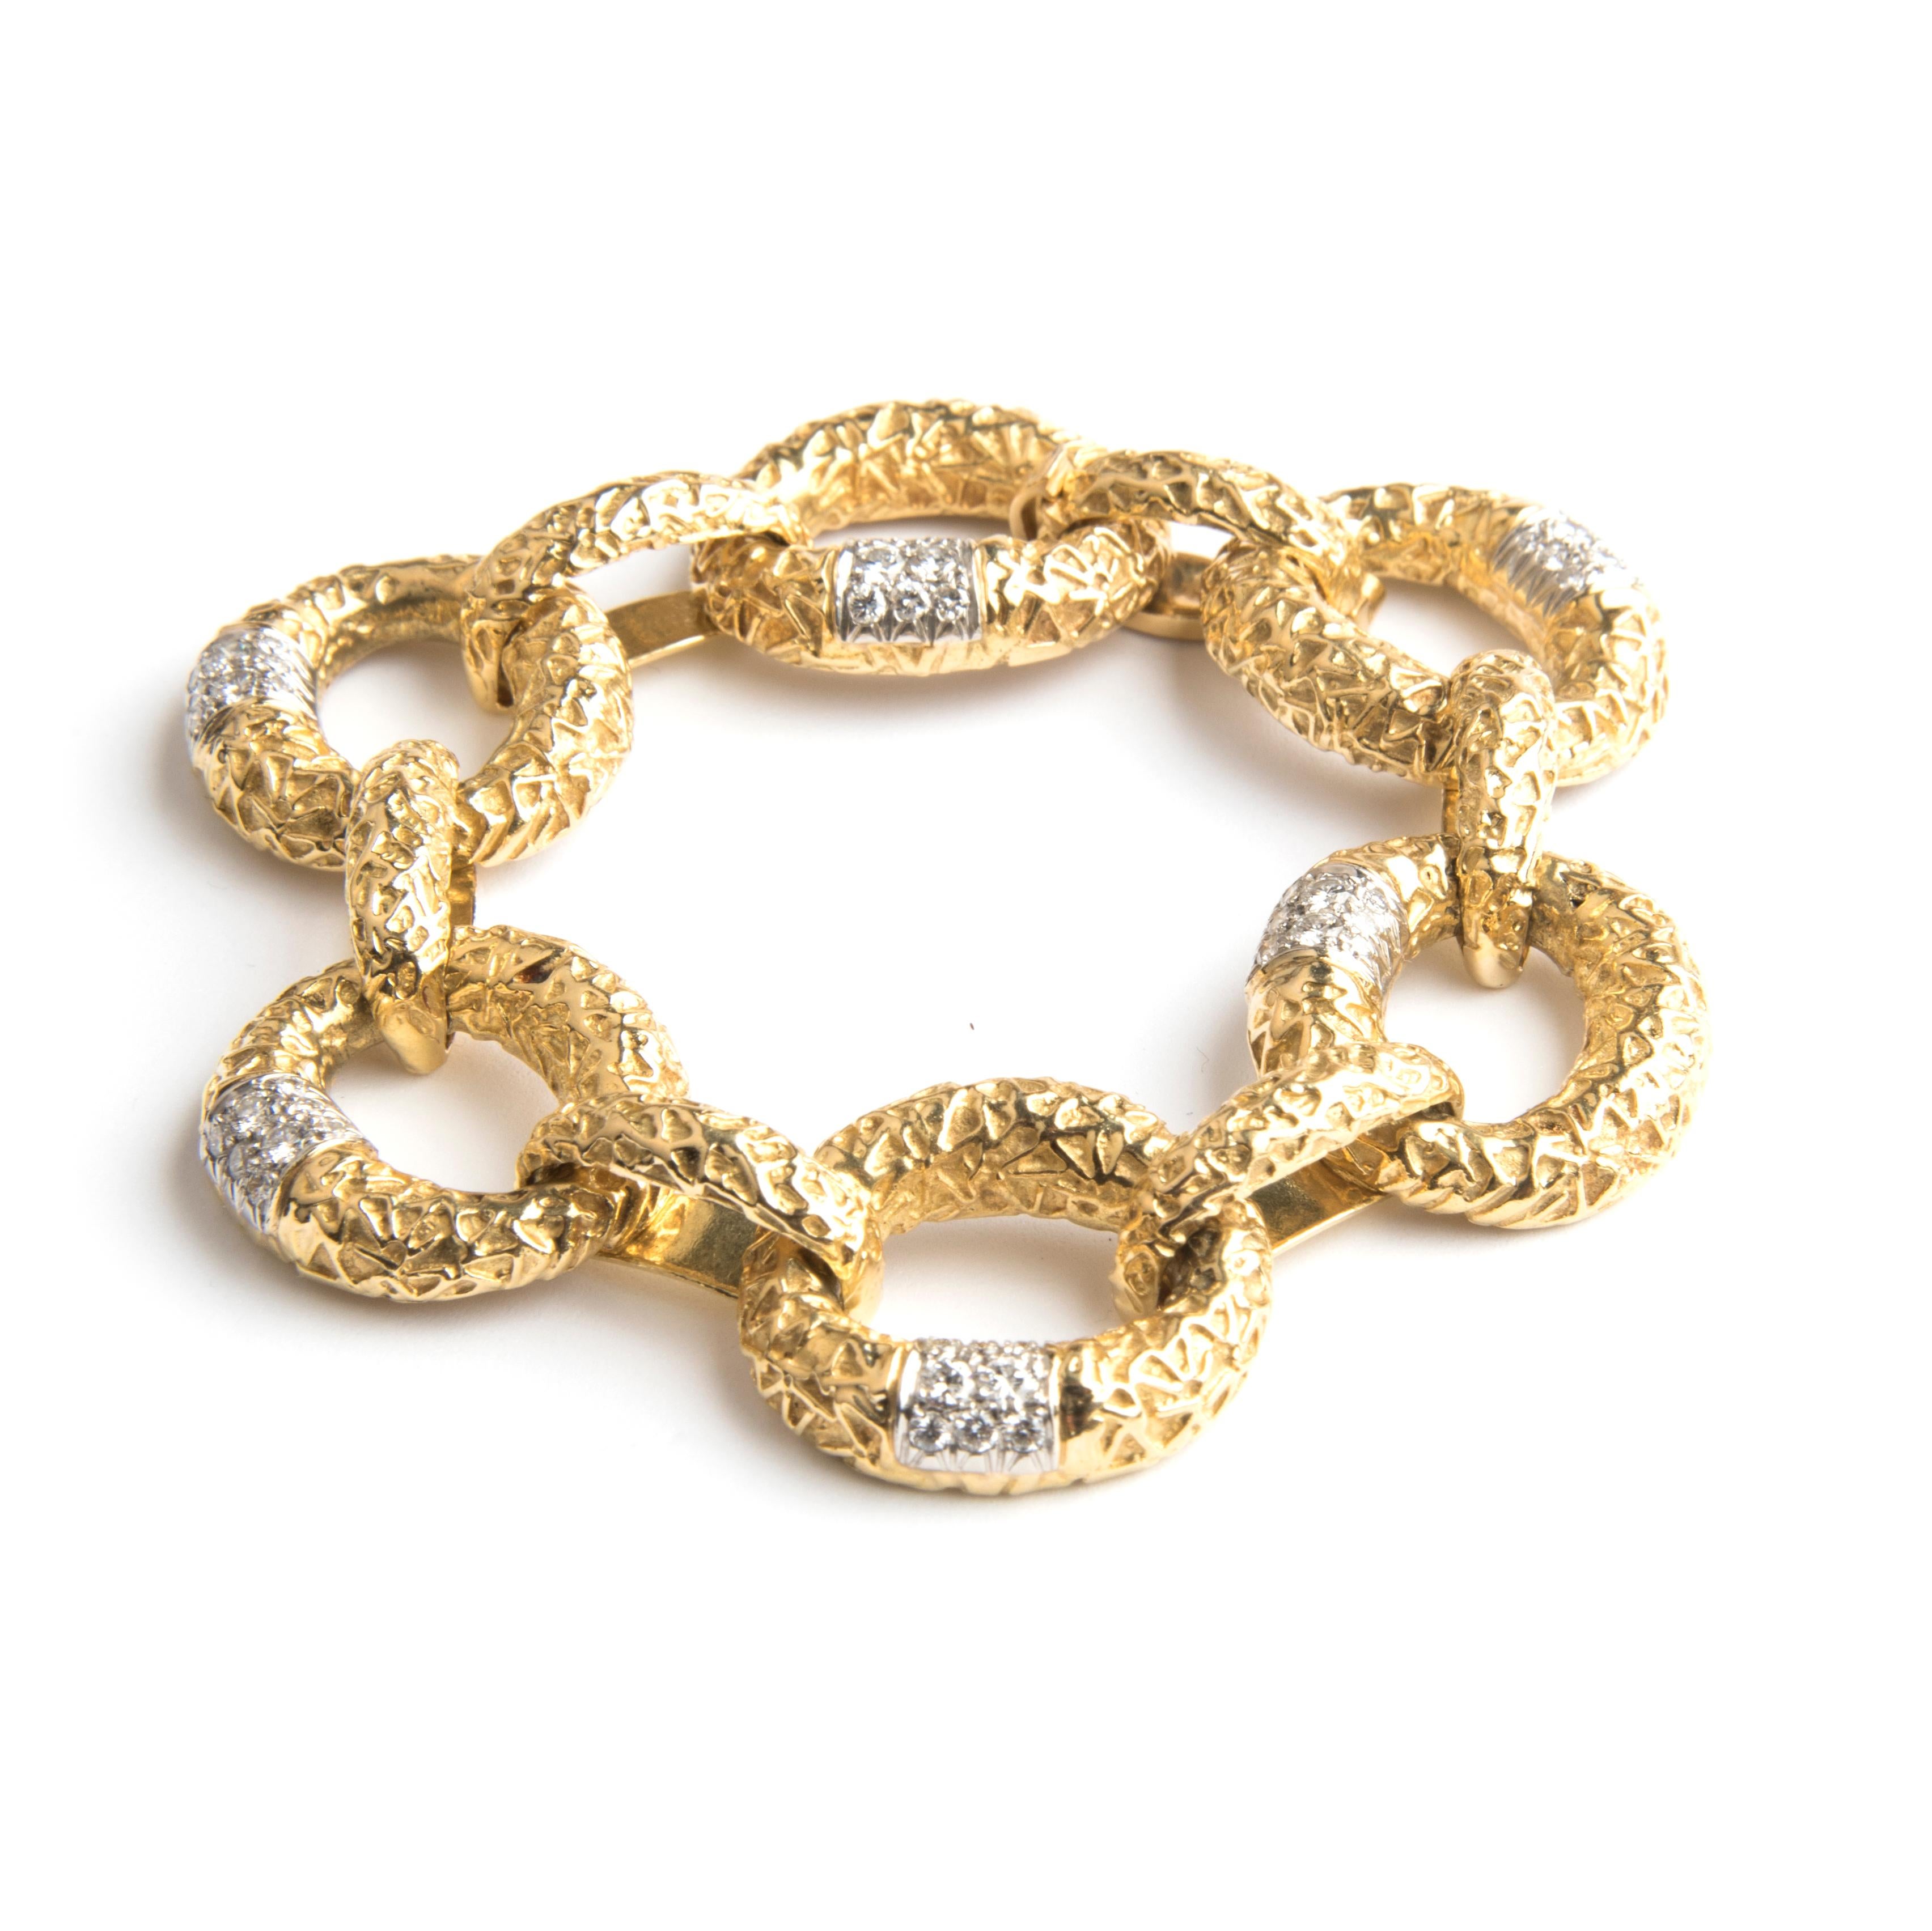 Van Cleef & Arpels 18k yellow gold chain bracelet, compromising 6 large and 6 small links, the large links partially set with diamonds.
Signed VCA NY, hallmark and numbered 57730.
Circa  1960